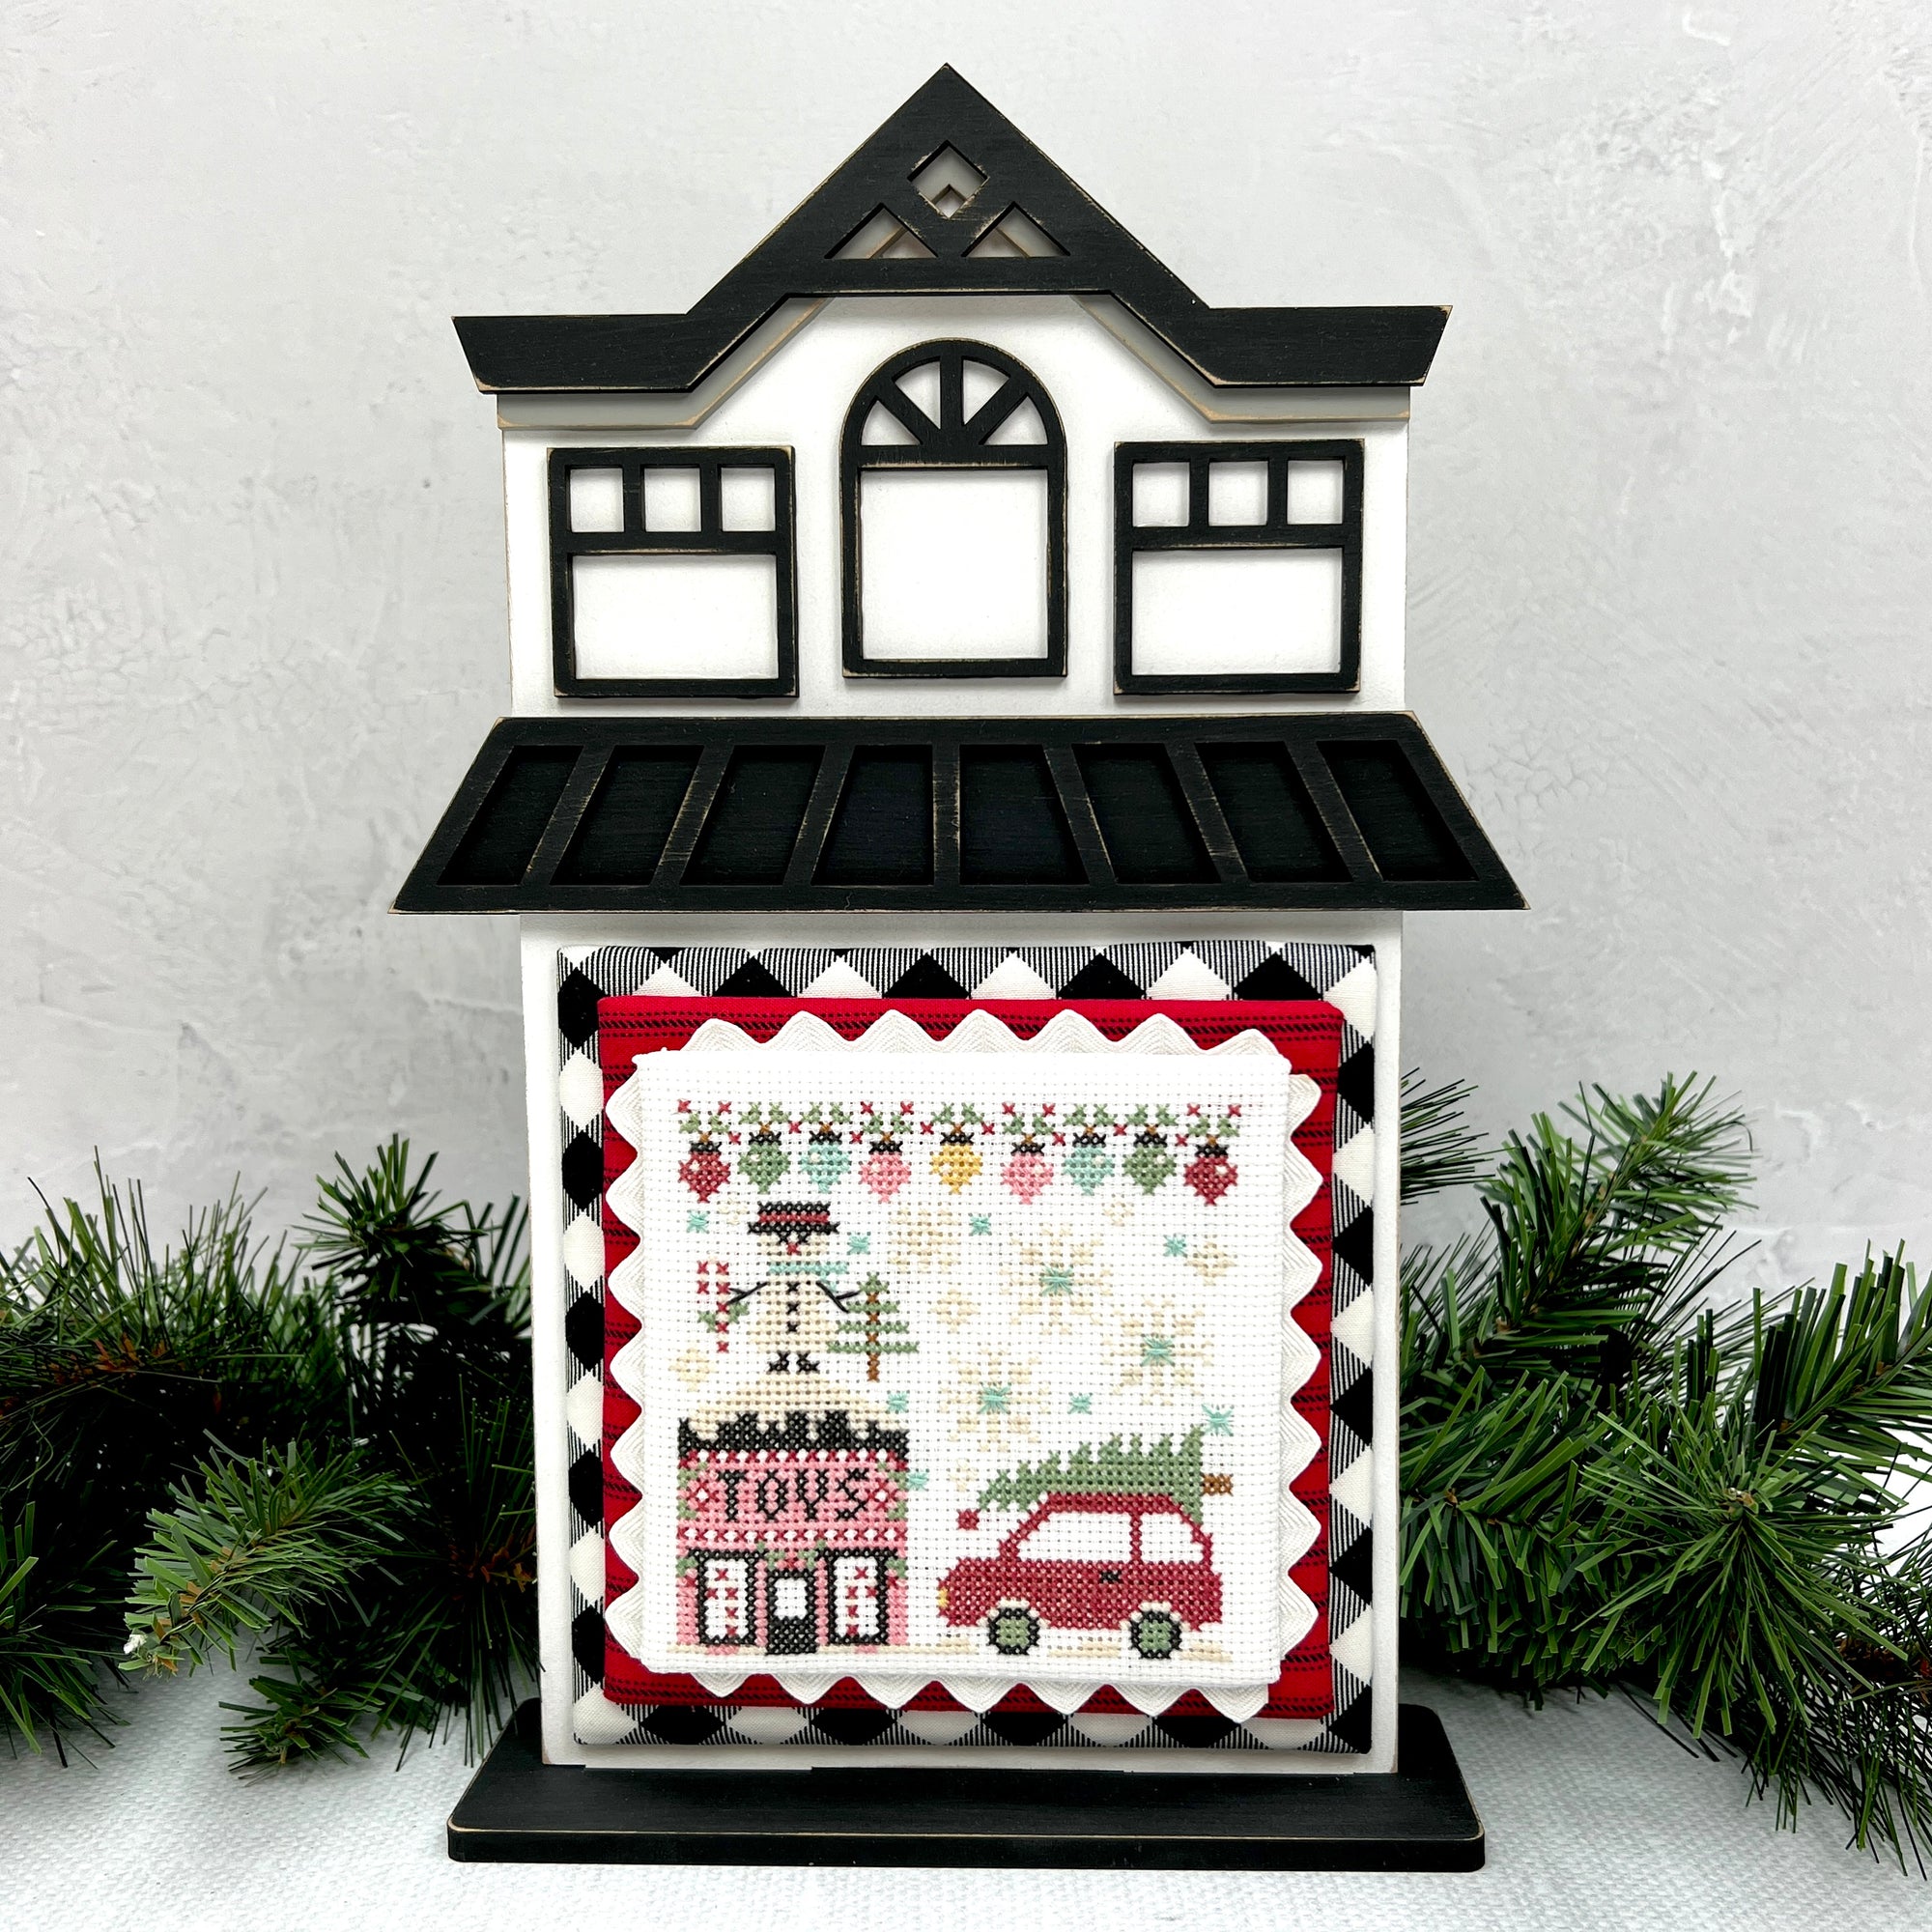 City Christmas cross stitch by Stitching with the Housewives shown on a wood city house cross stitch display